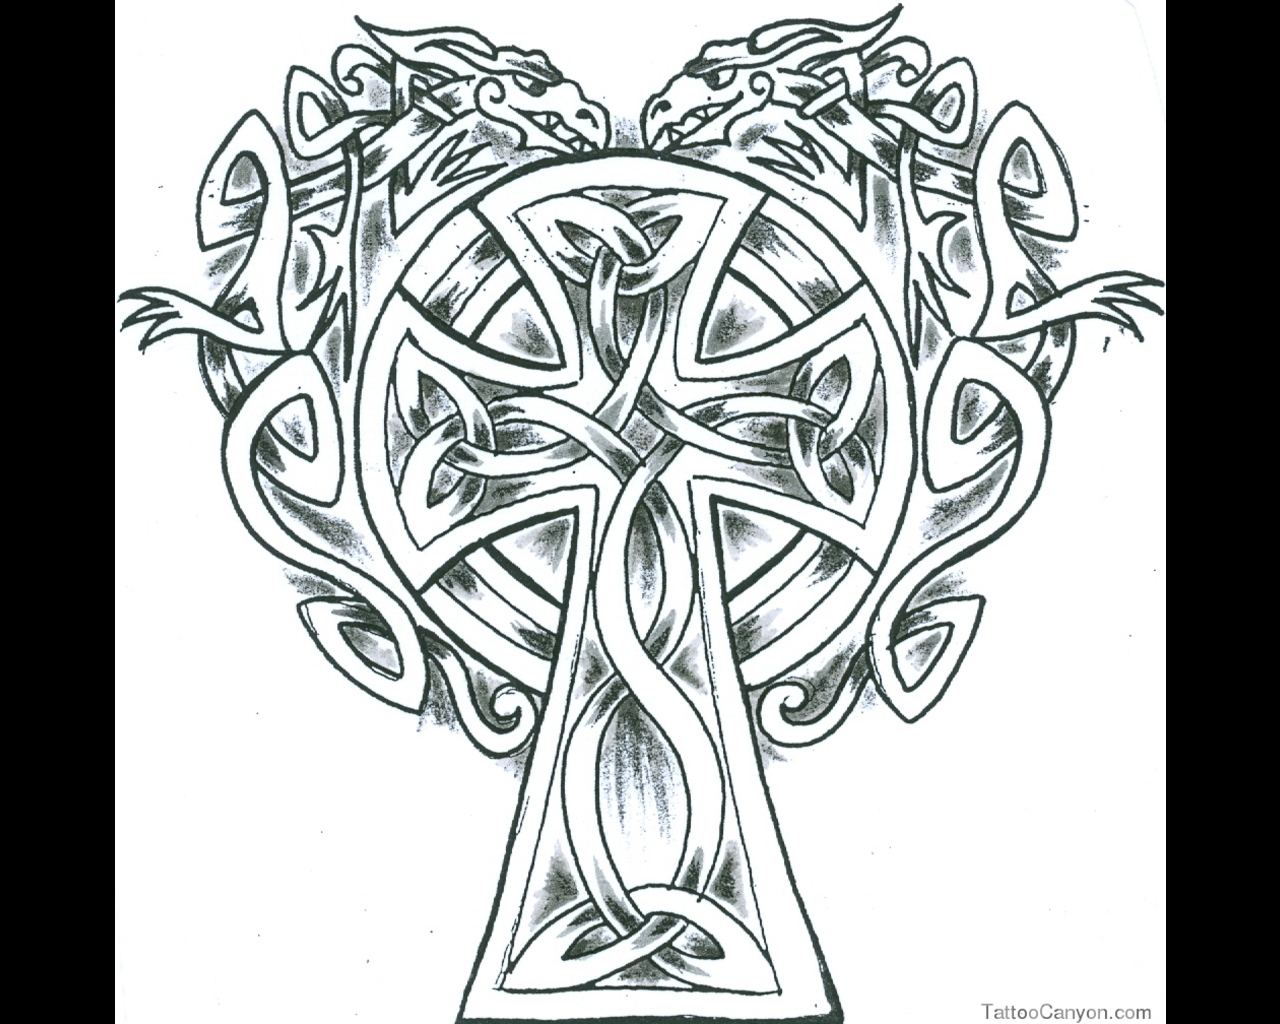 And Celtic Coloring Pages For Adults - Celtic Dragons - HD Wallpaper 